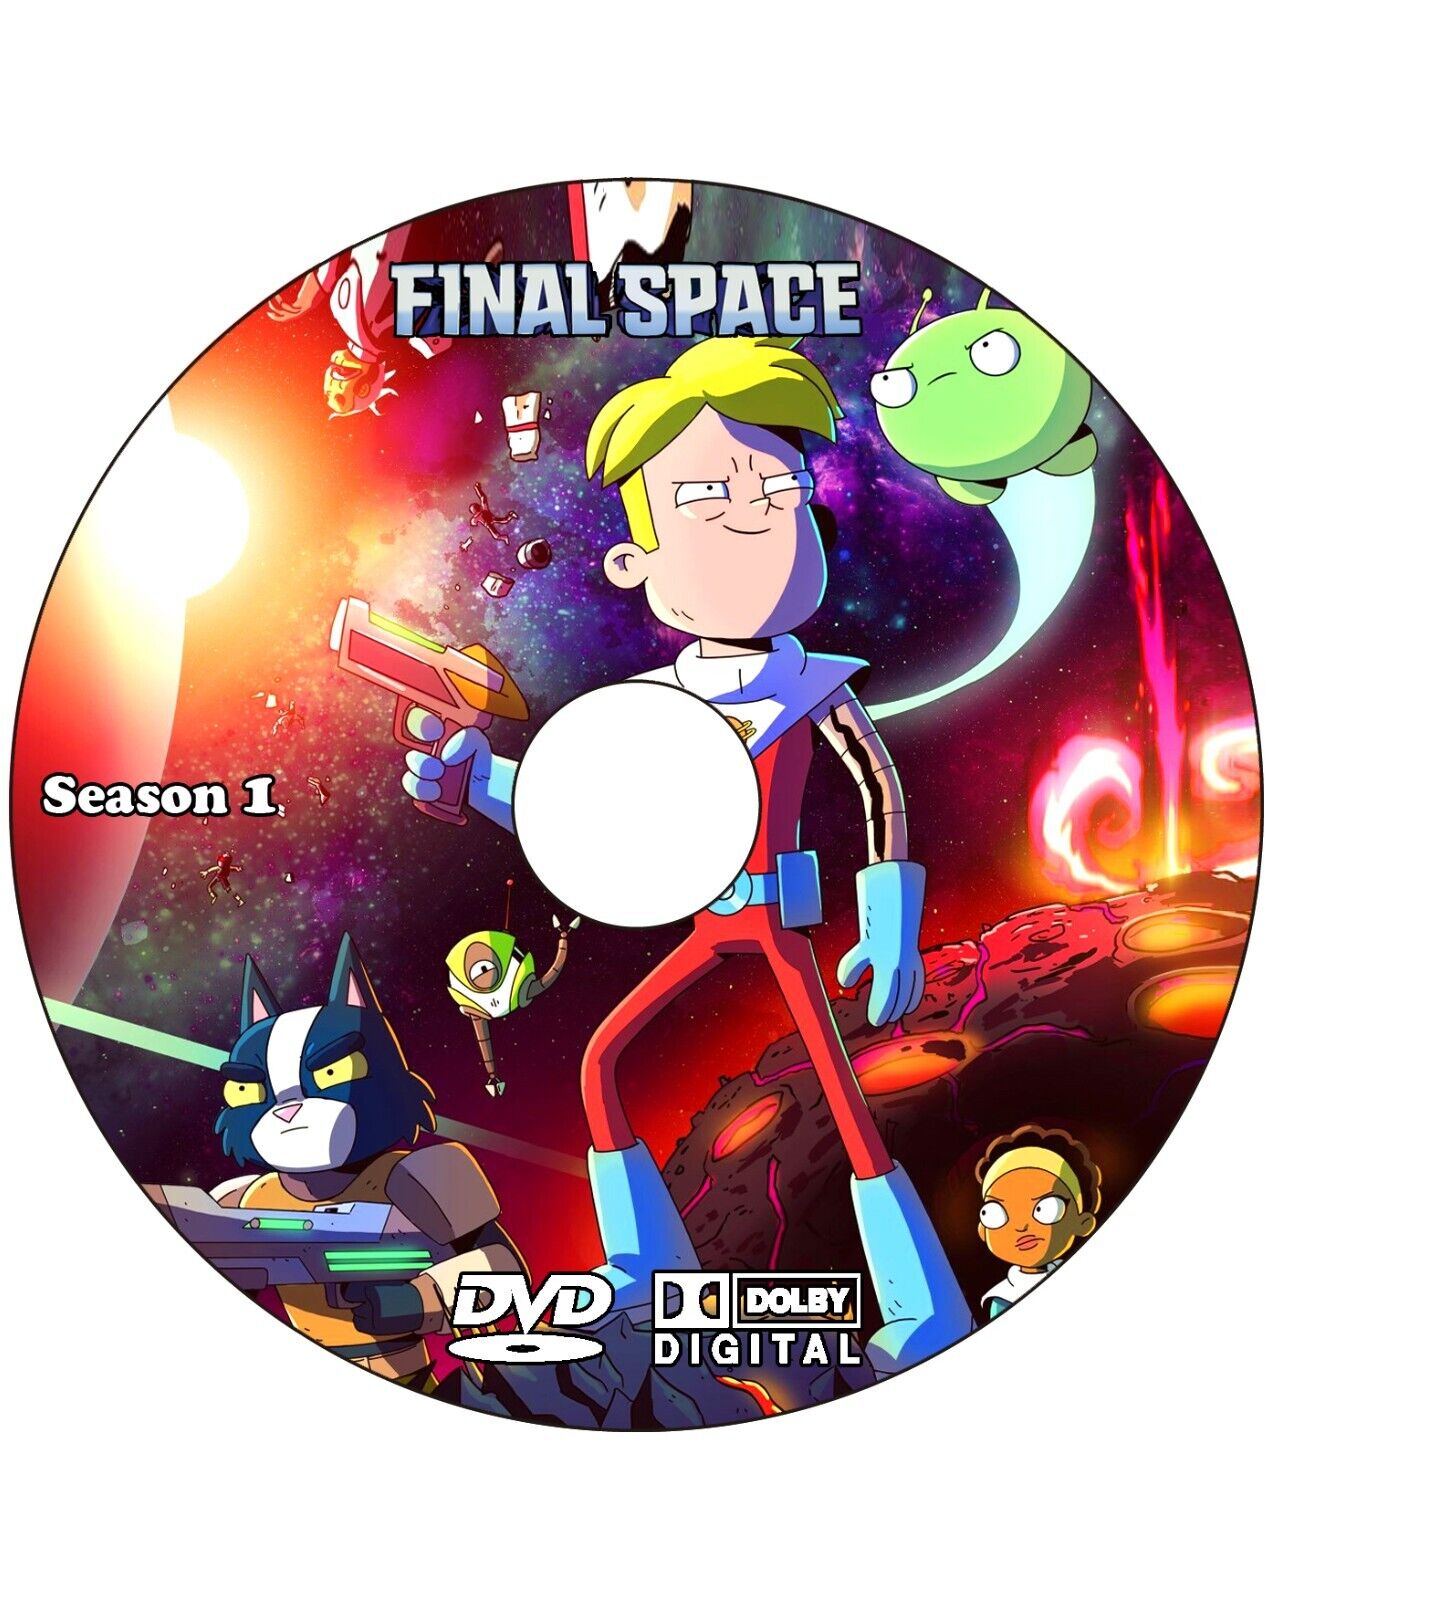 Final Space Series Season 1 to 3 and Episodes 1 to 36 with English Audio